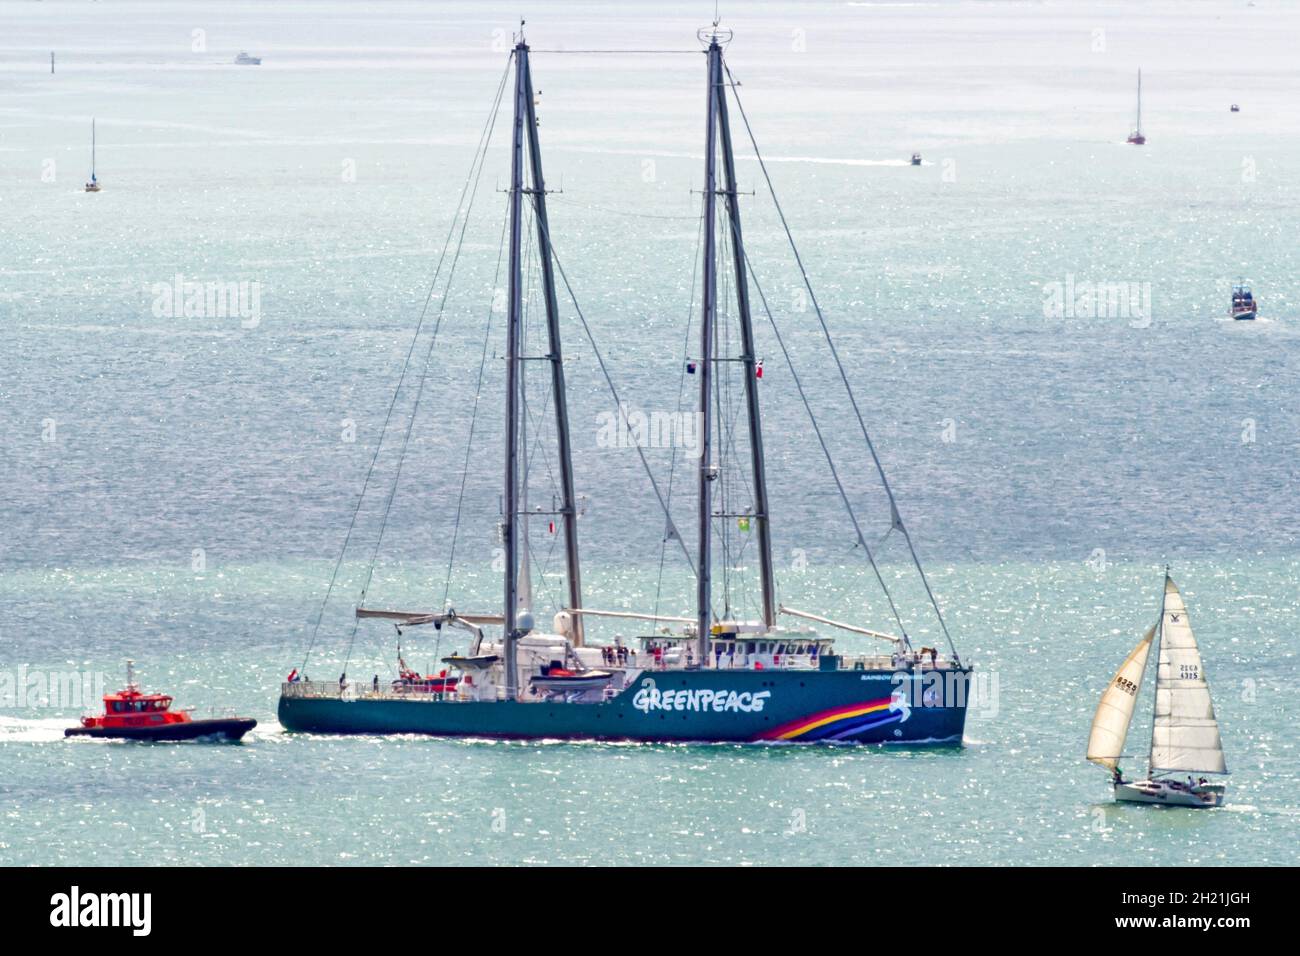 The new Rainbow Warrior, is the first purpose built ship, funded entirely by donations for Greenpeace, arrives in the Waitemata Harbour where the original vessel was bombed in 1985 by the French intelligence service, Auckland, New Zealand, Friday, January 11, 2013. Stock Photo